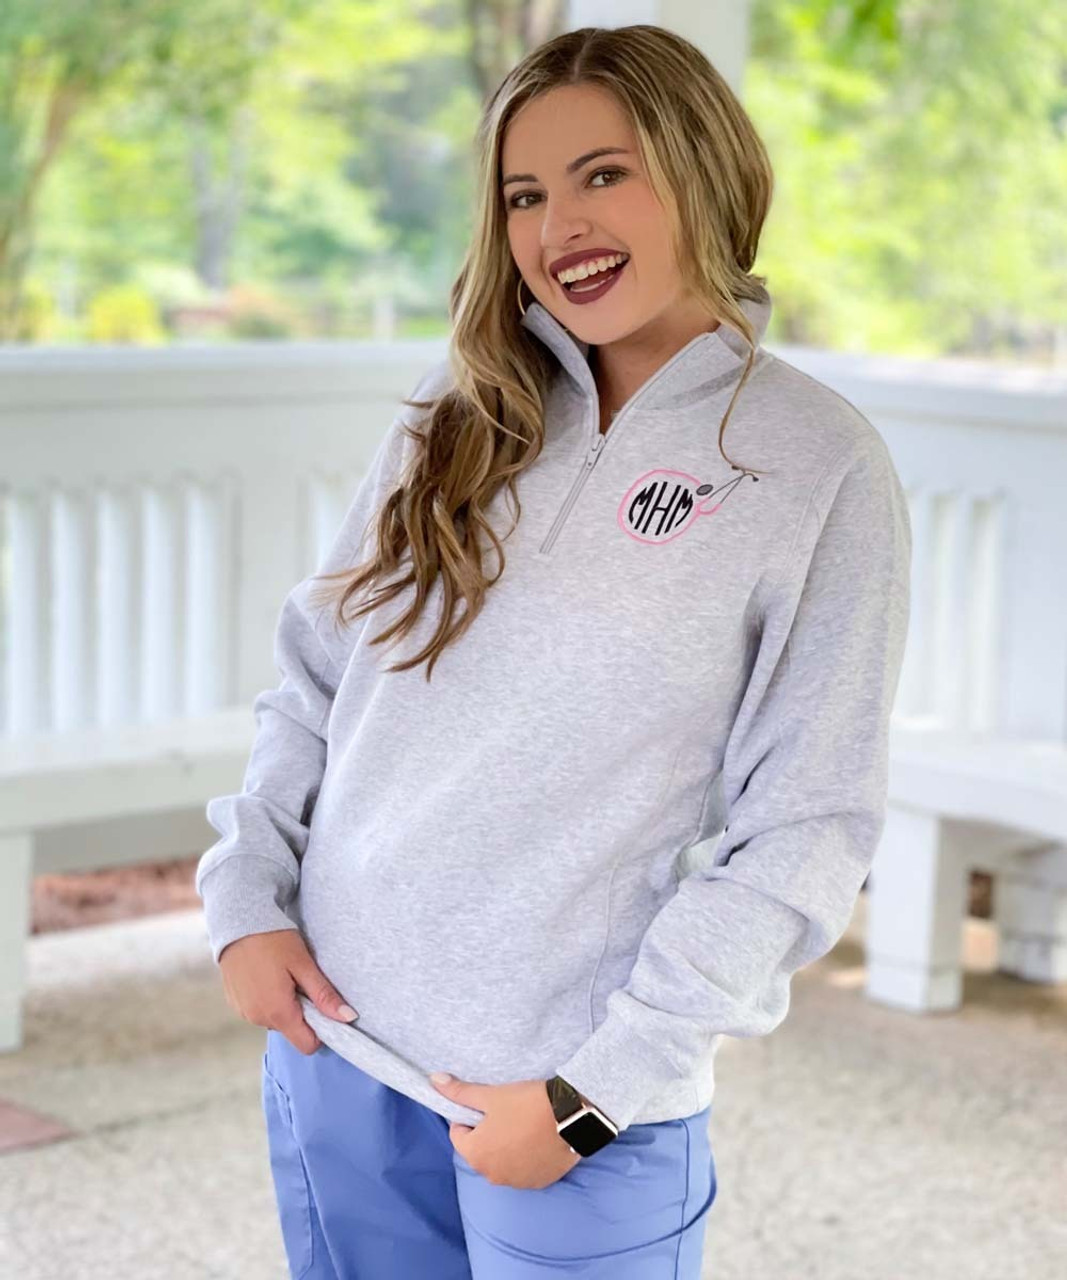 Monogrammed Embroidered Medical Caduceus 1/4 Zip Pullover